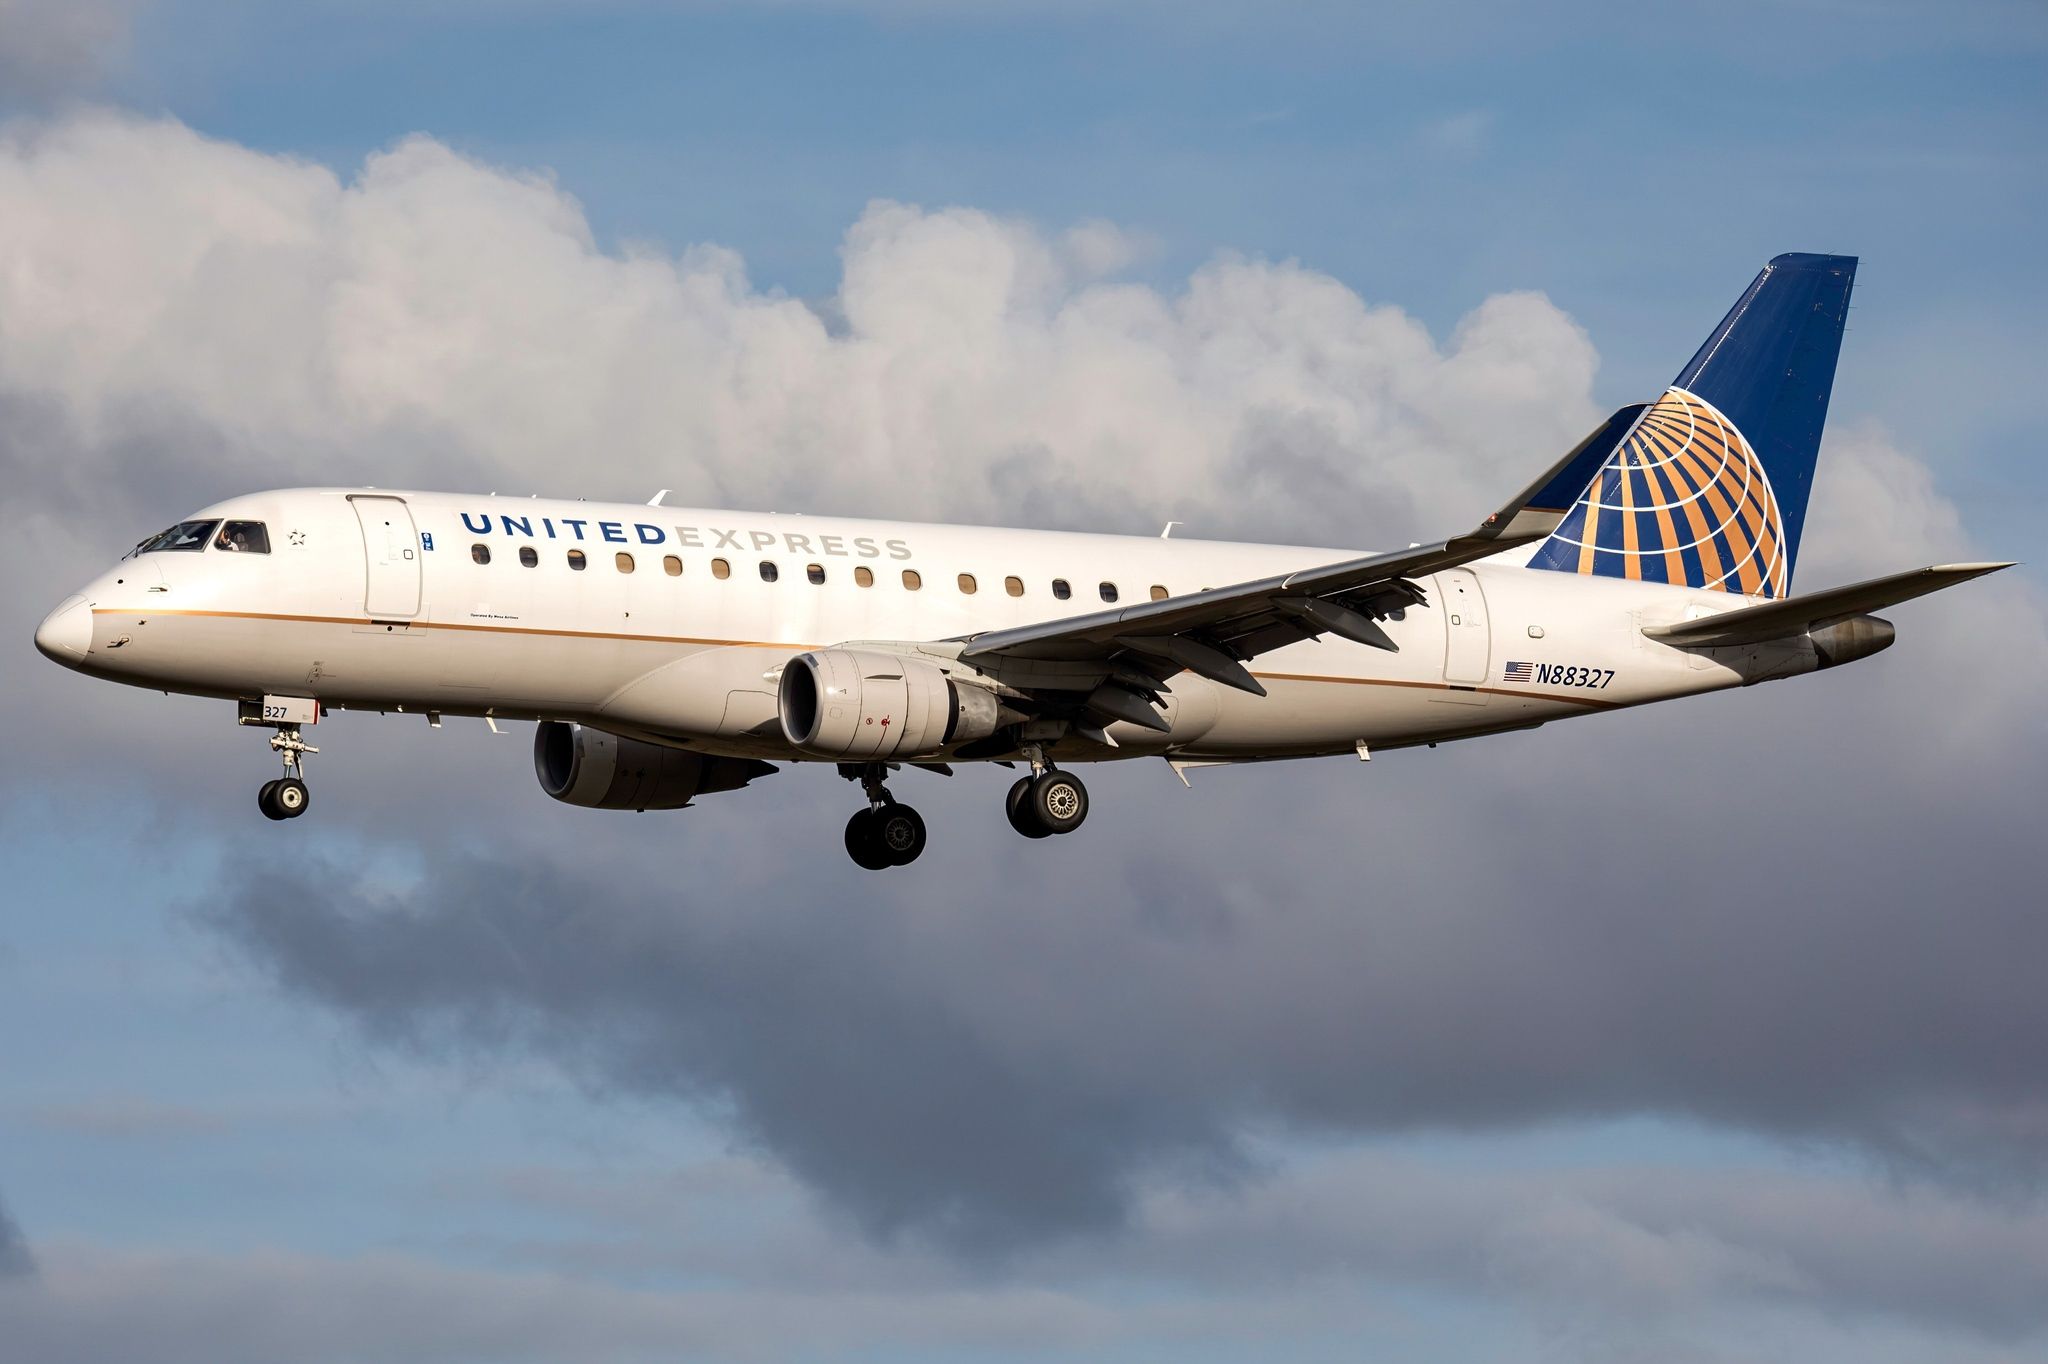 United Express (Mesa Airlines) Embraer E175 N88327 on approach.